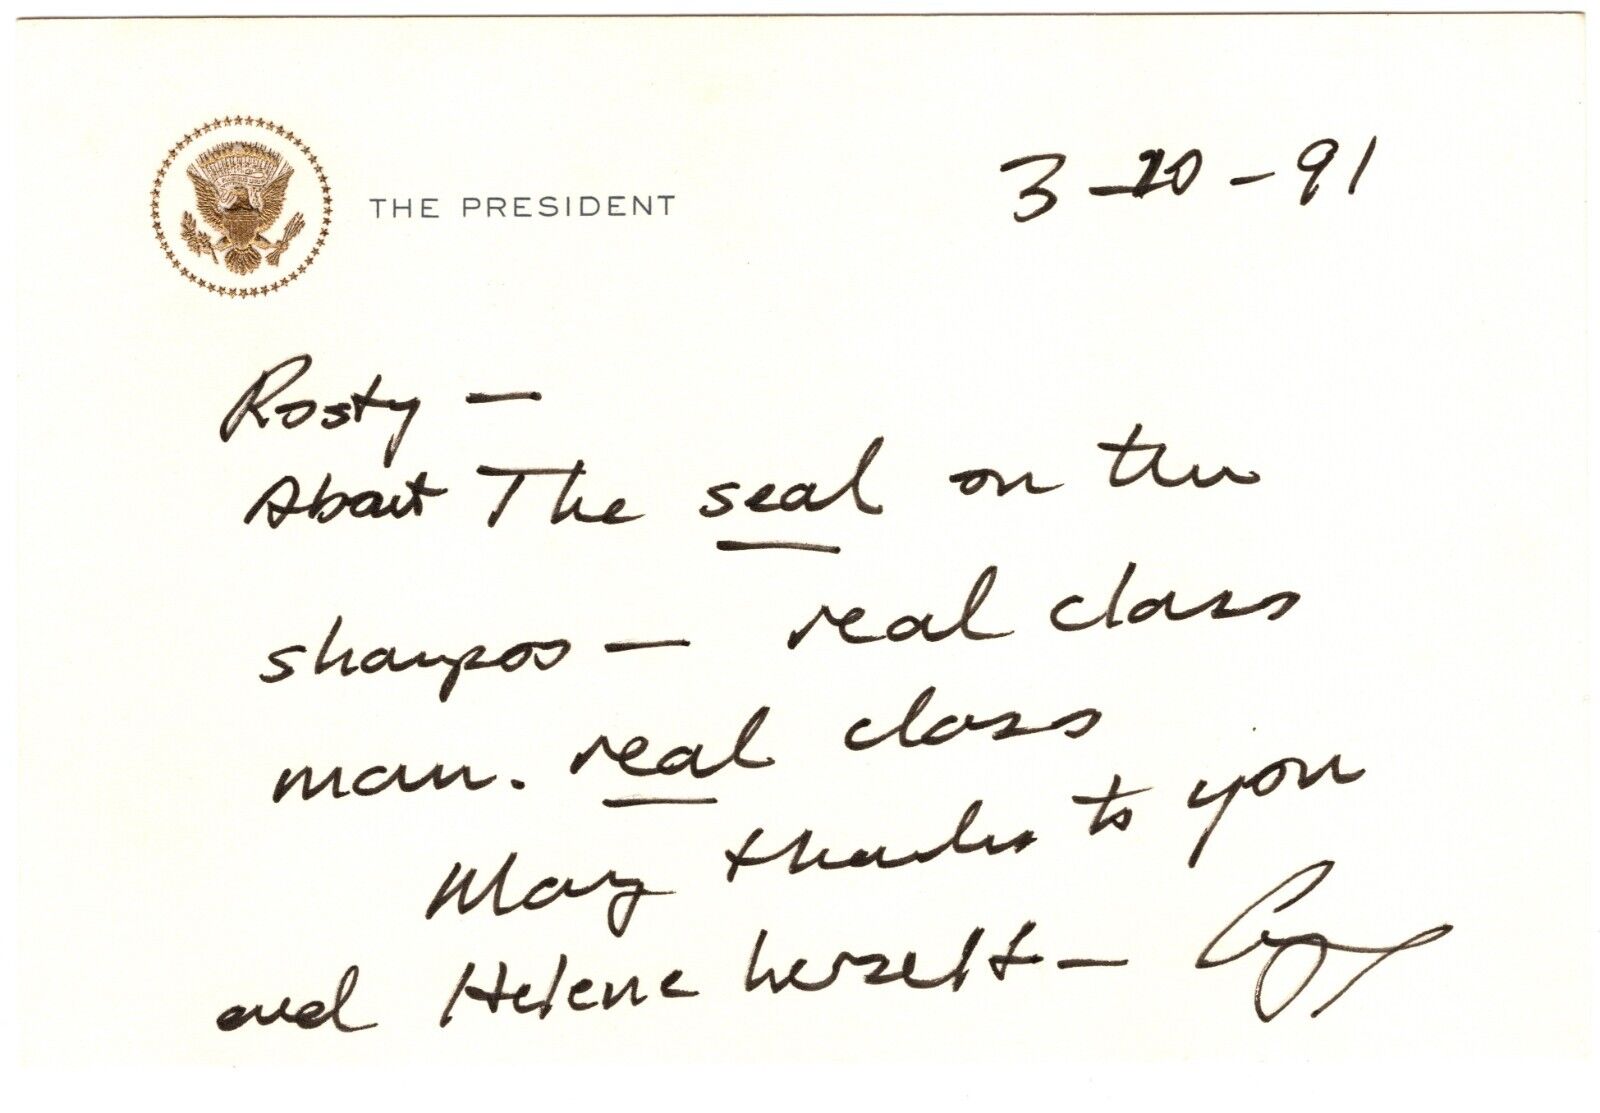 George H.W. Bush - Autograph Letter Signed in 1991 - Sent to Convicted Criminal